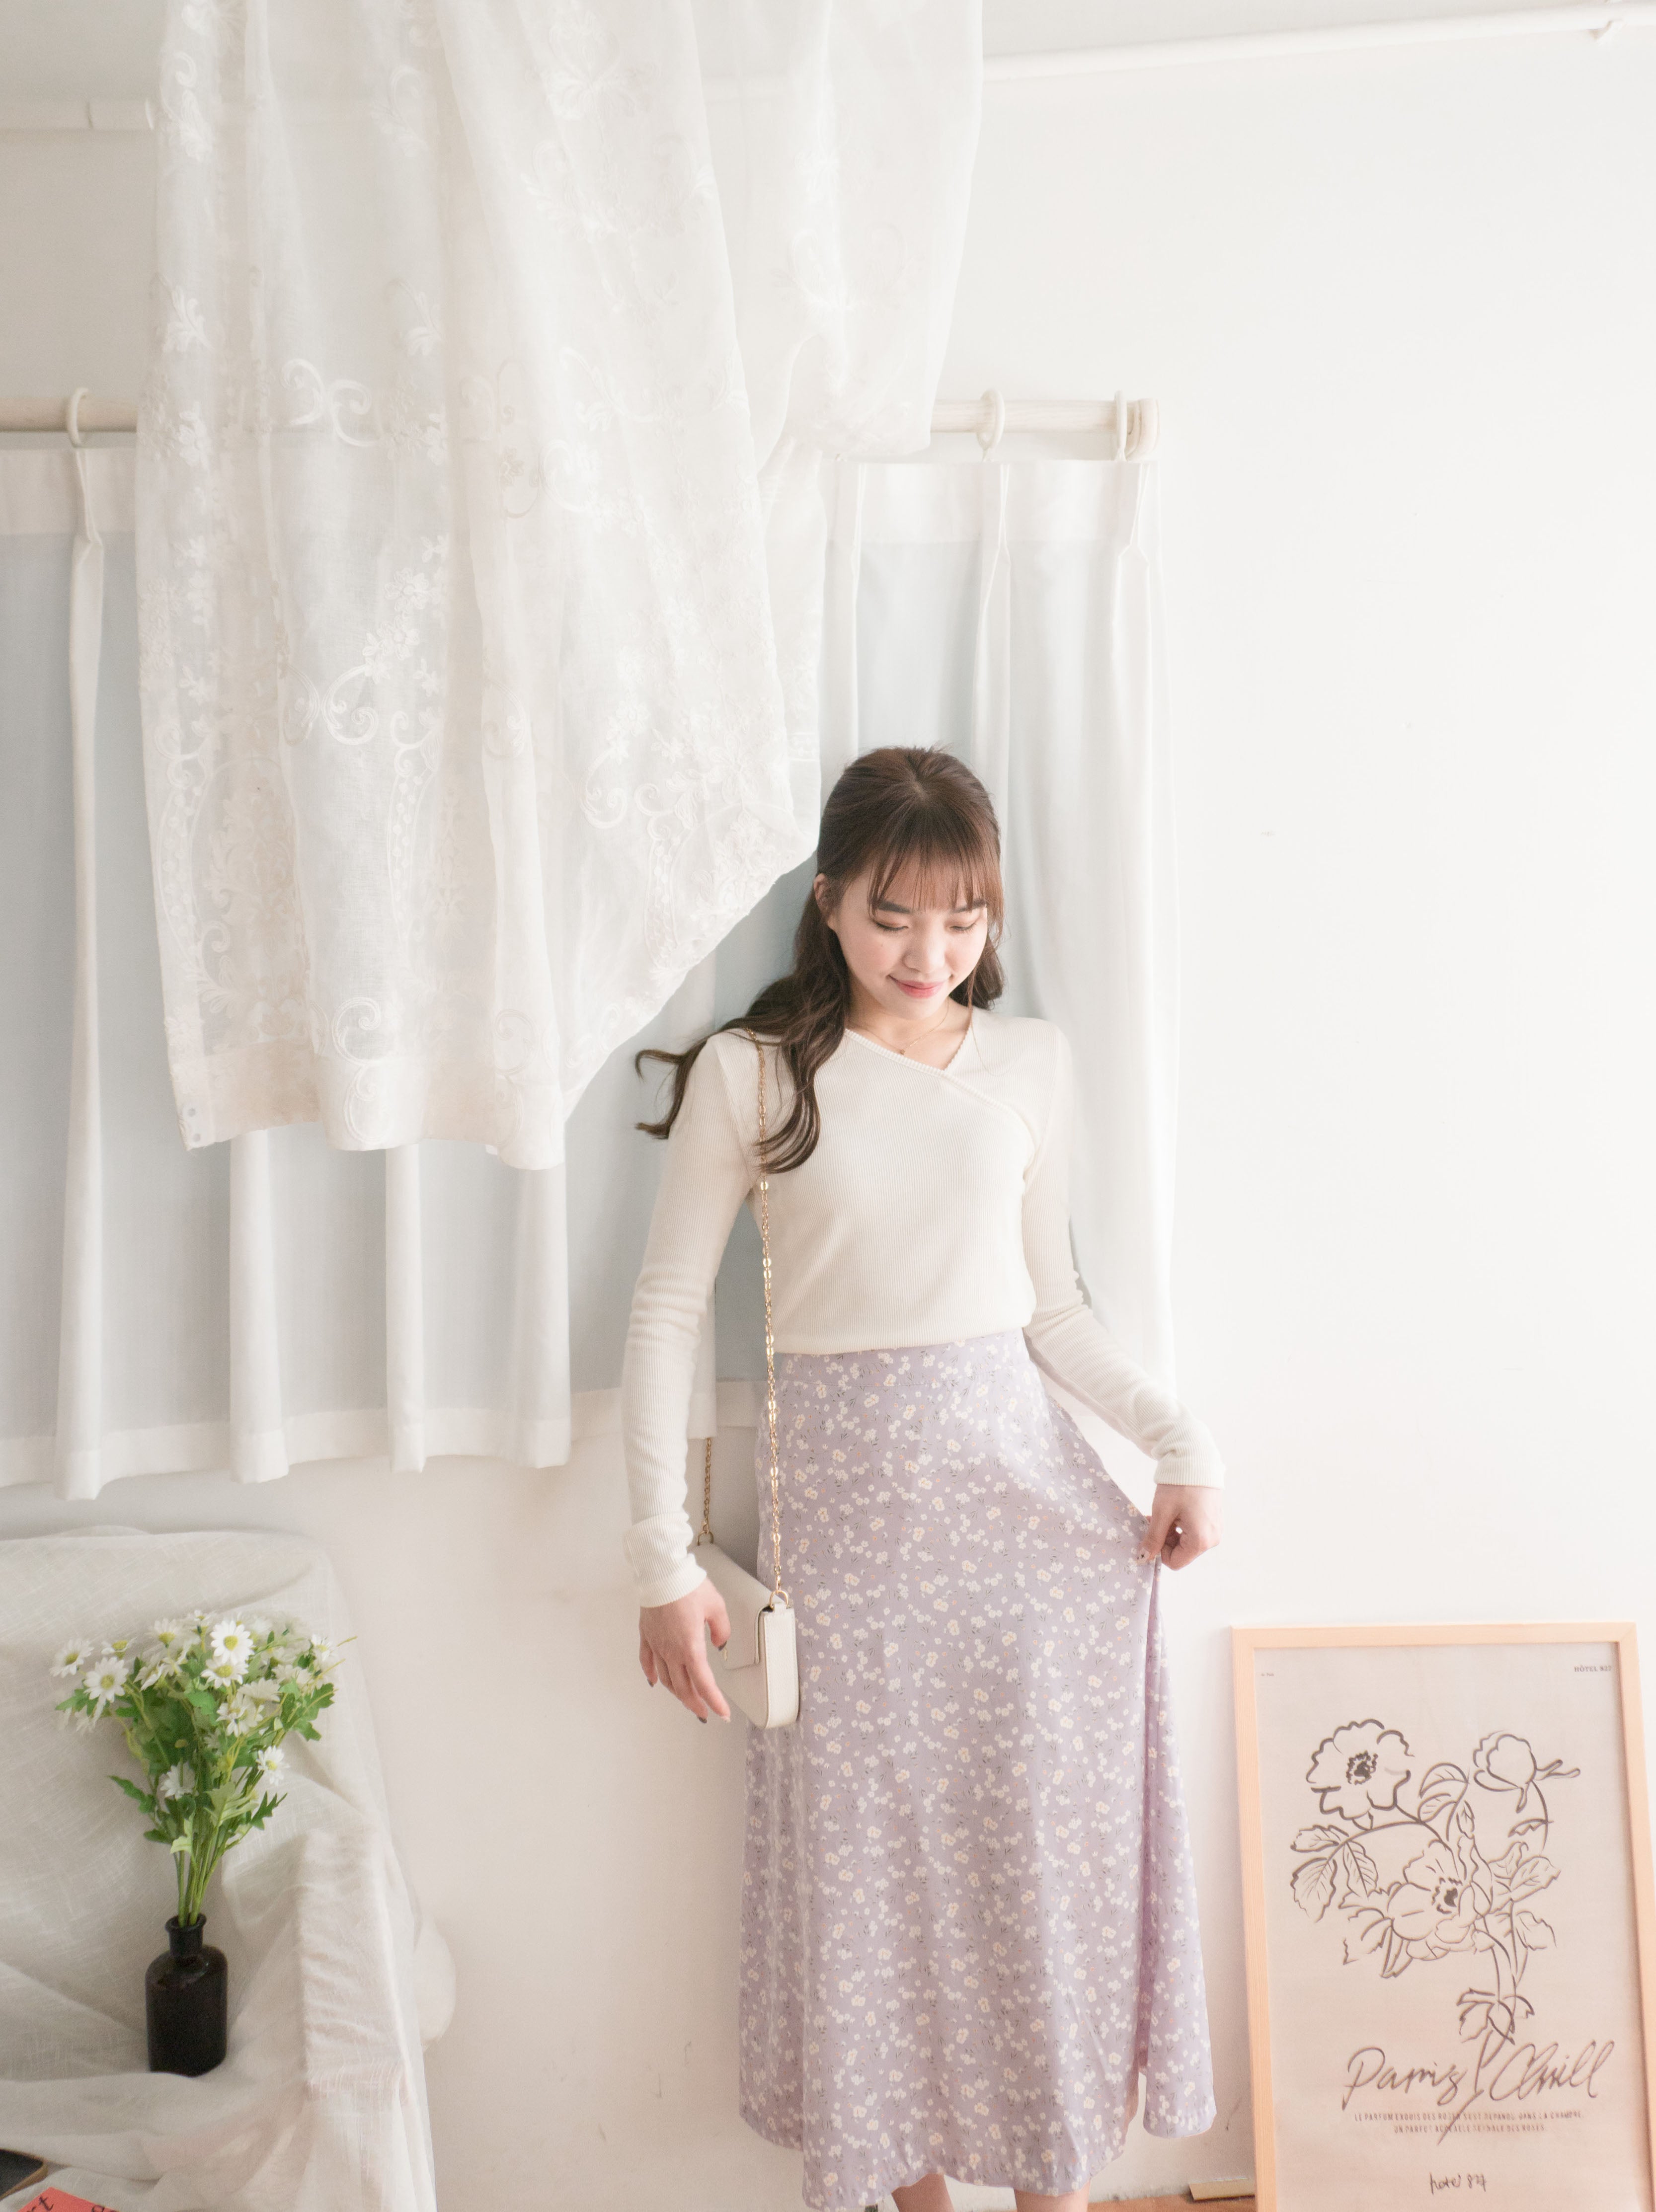 Daisy Lily 浪漫飄飄散落印花半身傘裙, Skirt/ SK8780 (lavender sold out)